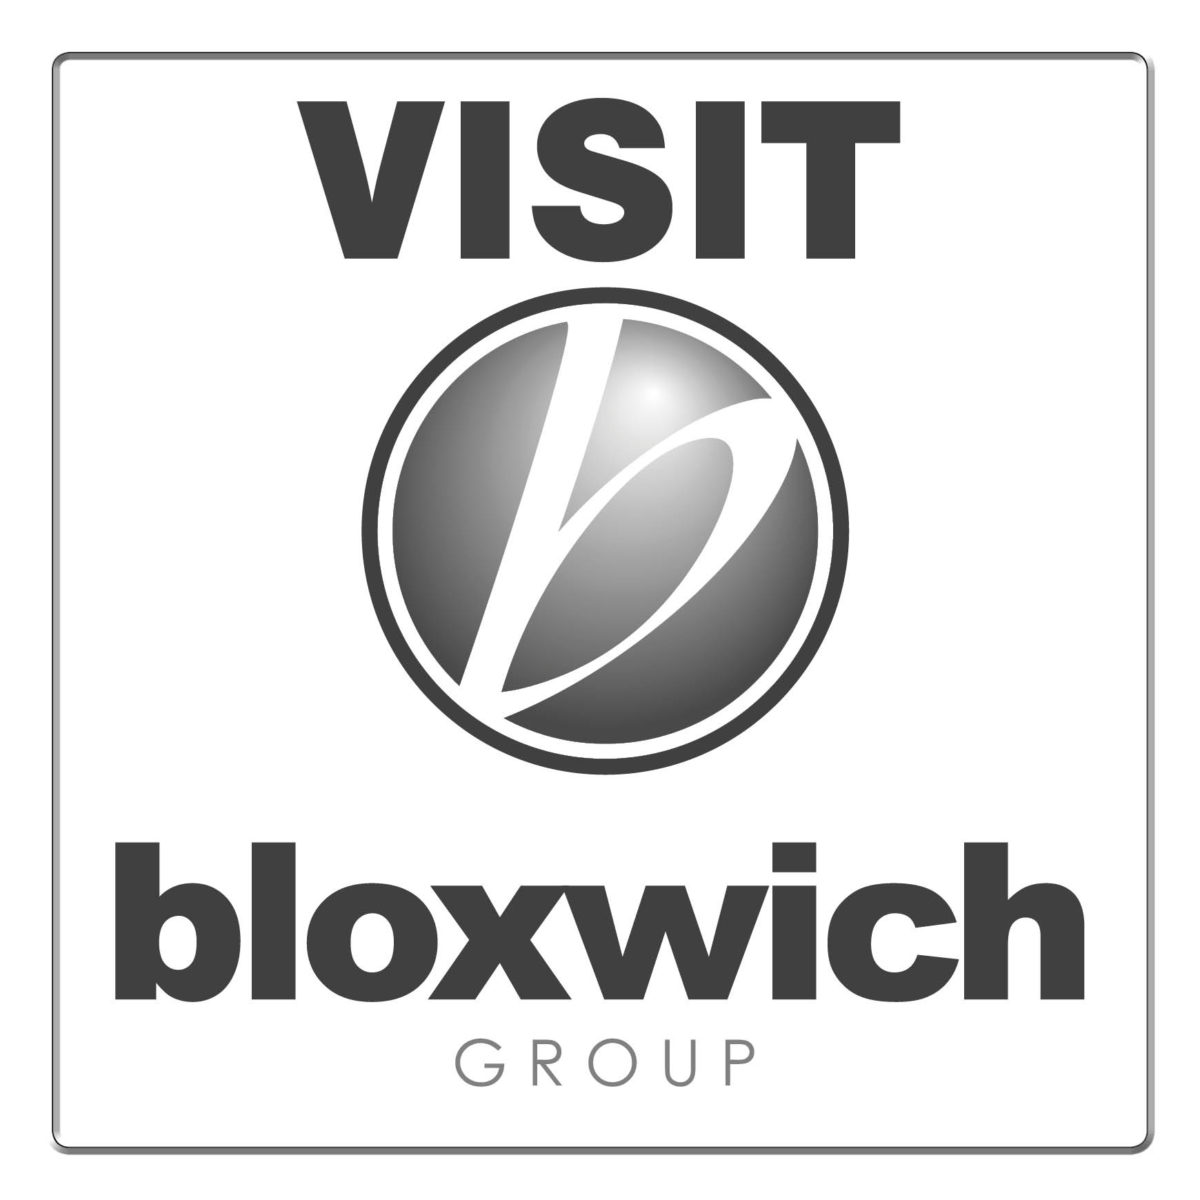 Click here to visit the new bloxwich group website